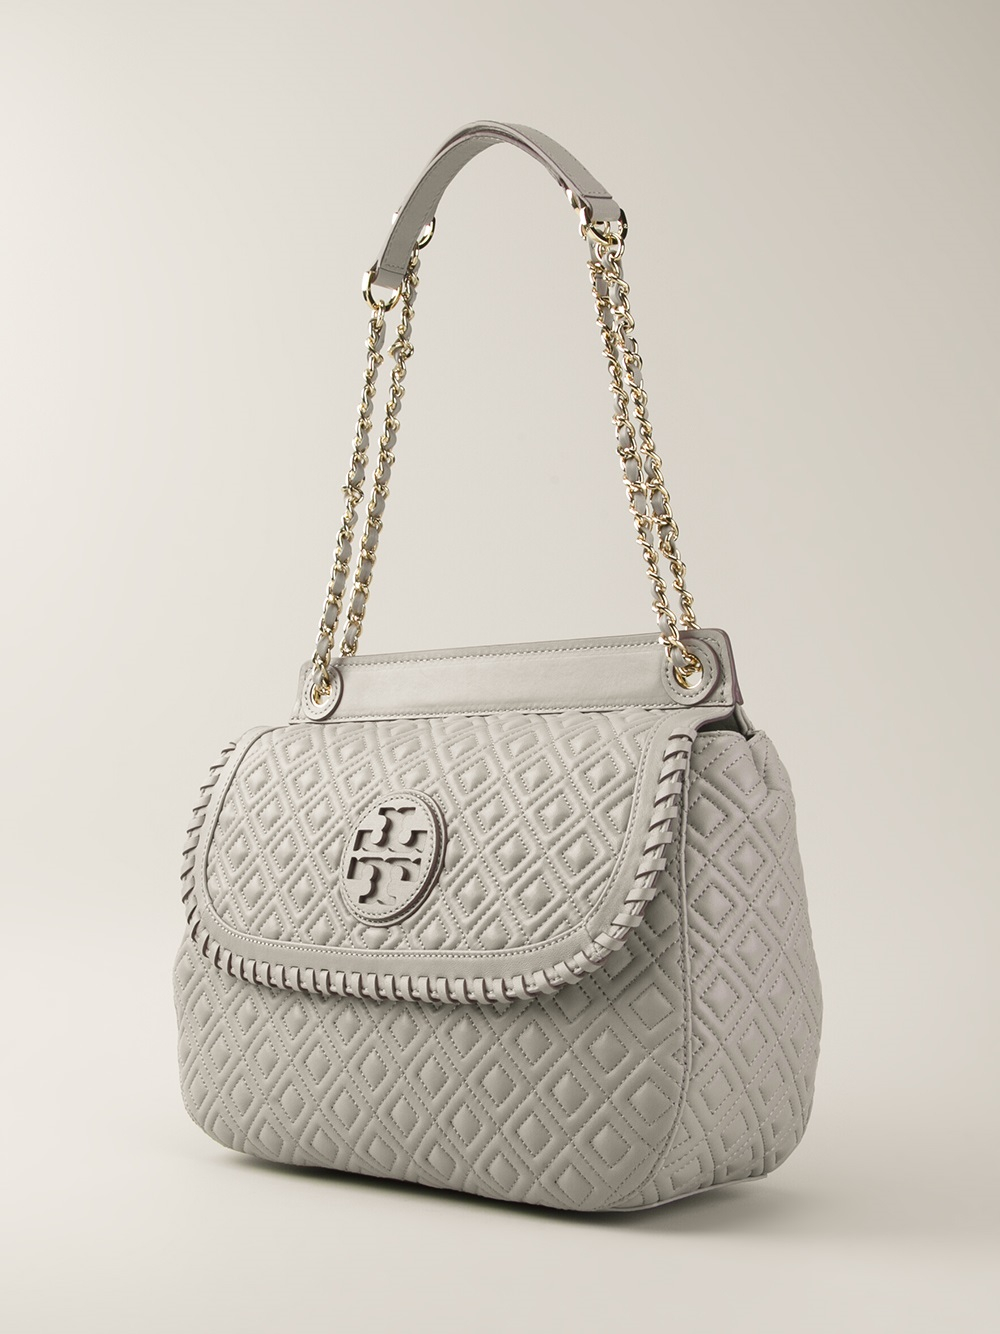 Lyst - Tory Burch Marion Quilted Shoulder Bag in Gray